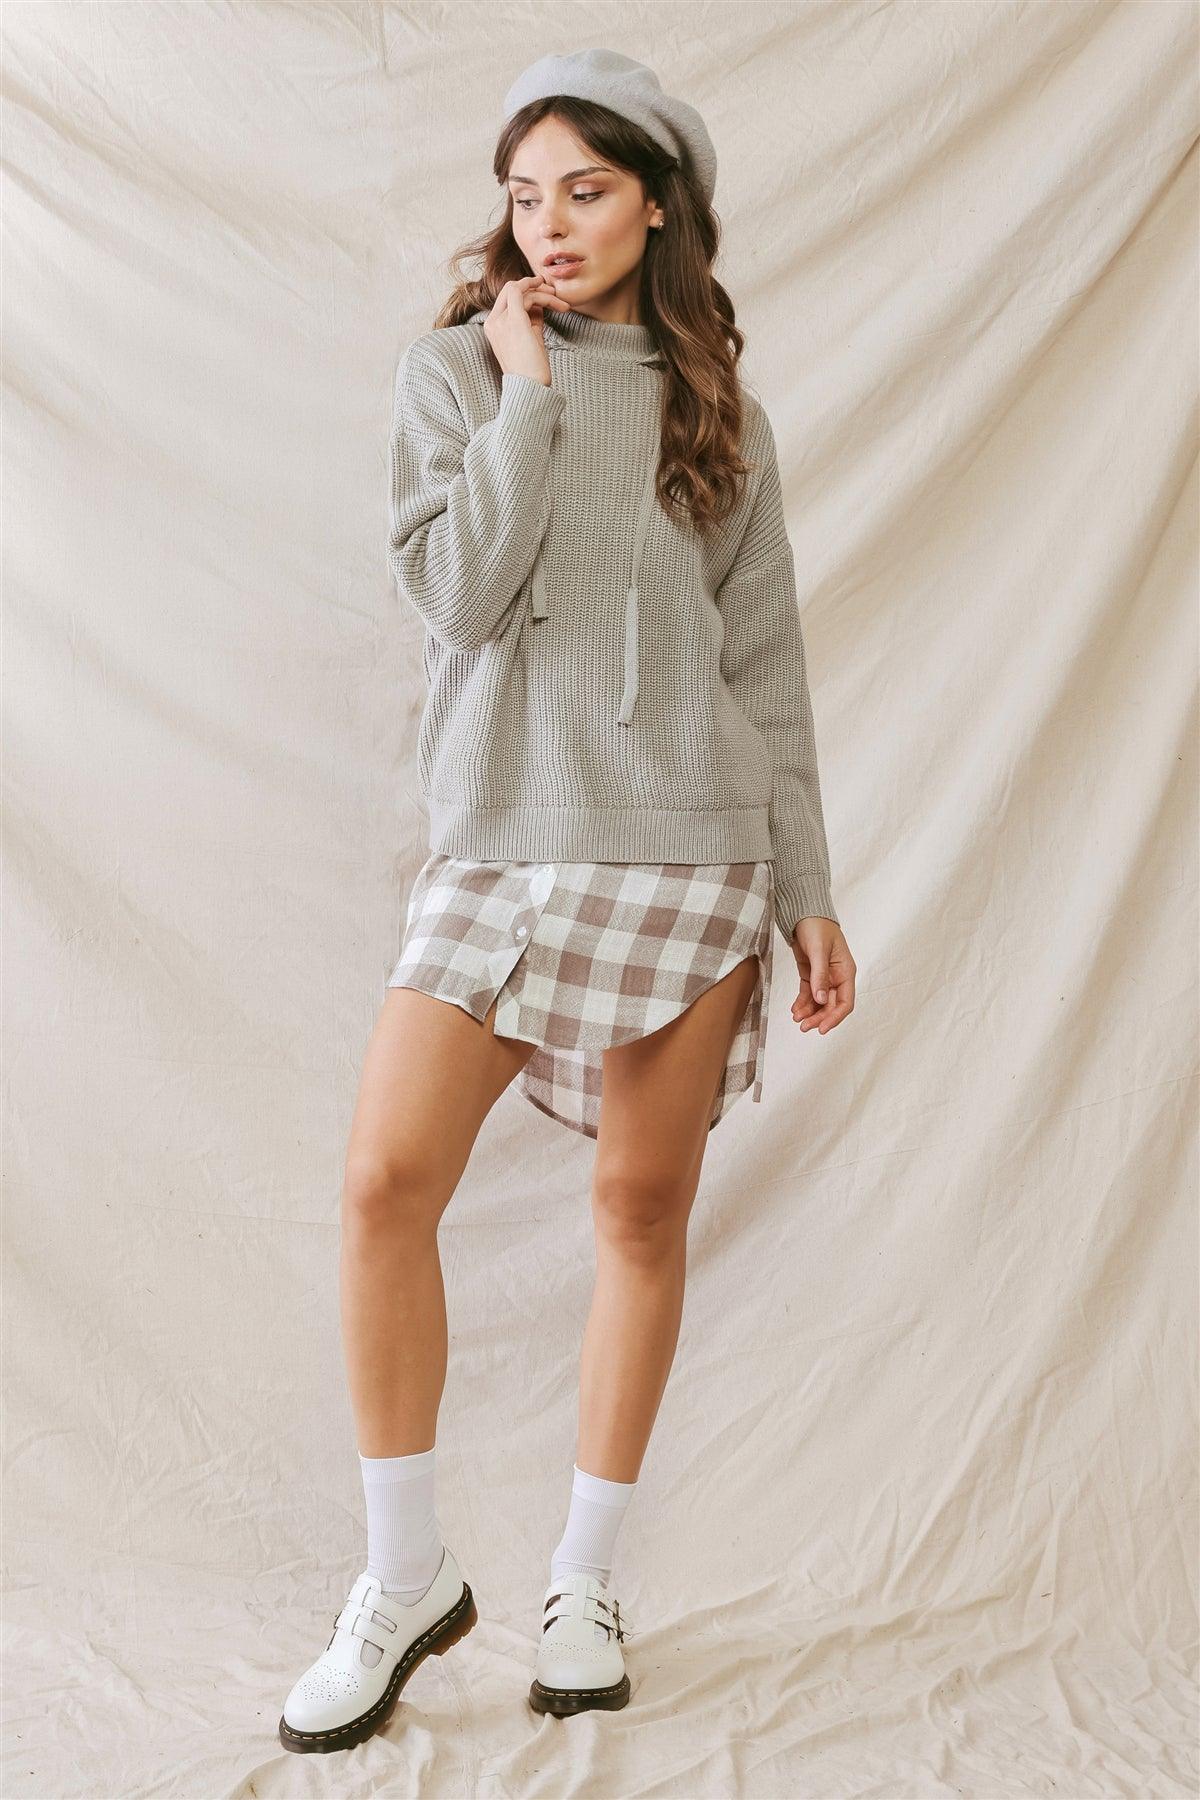 Heather Grey Knit Hooded Long Sleeve Relaxed Sweater /2-2-2